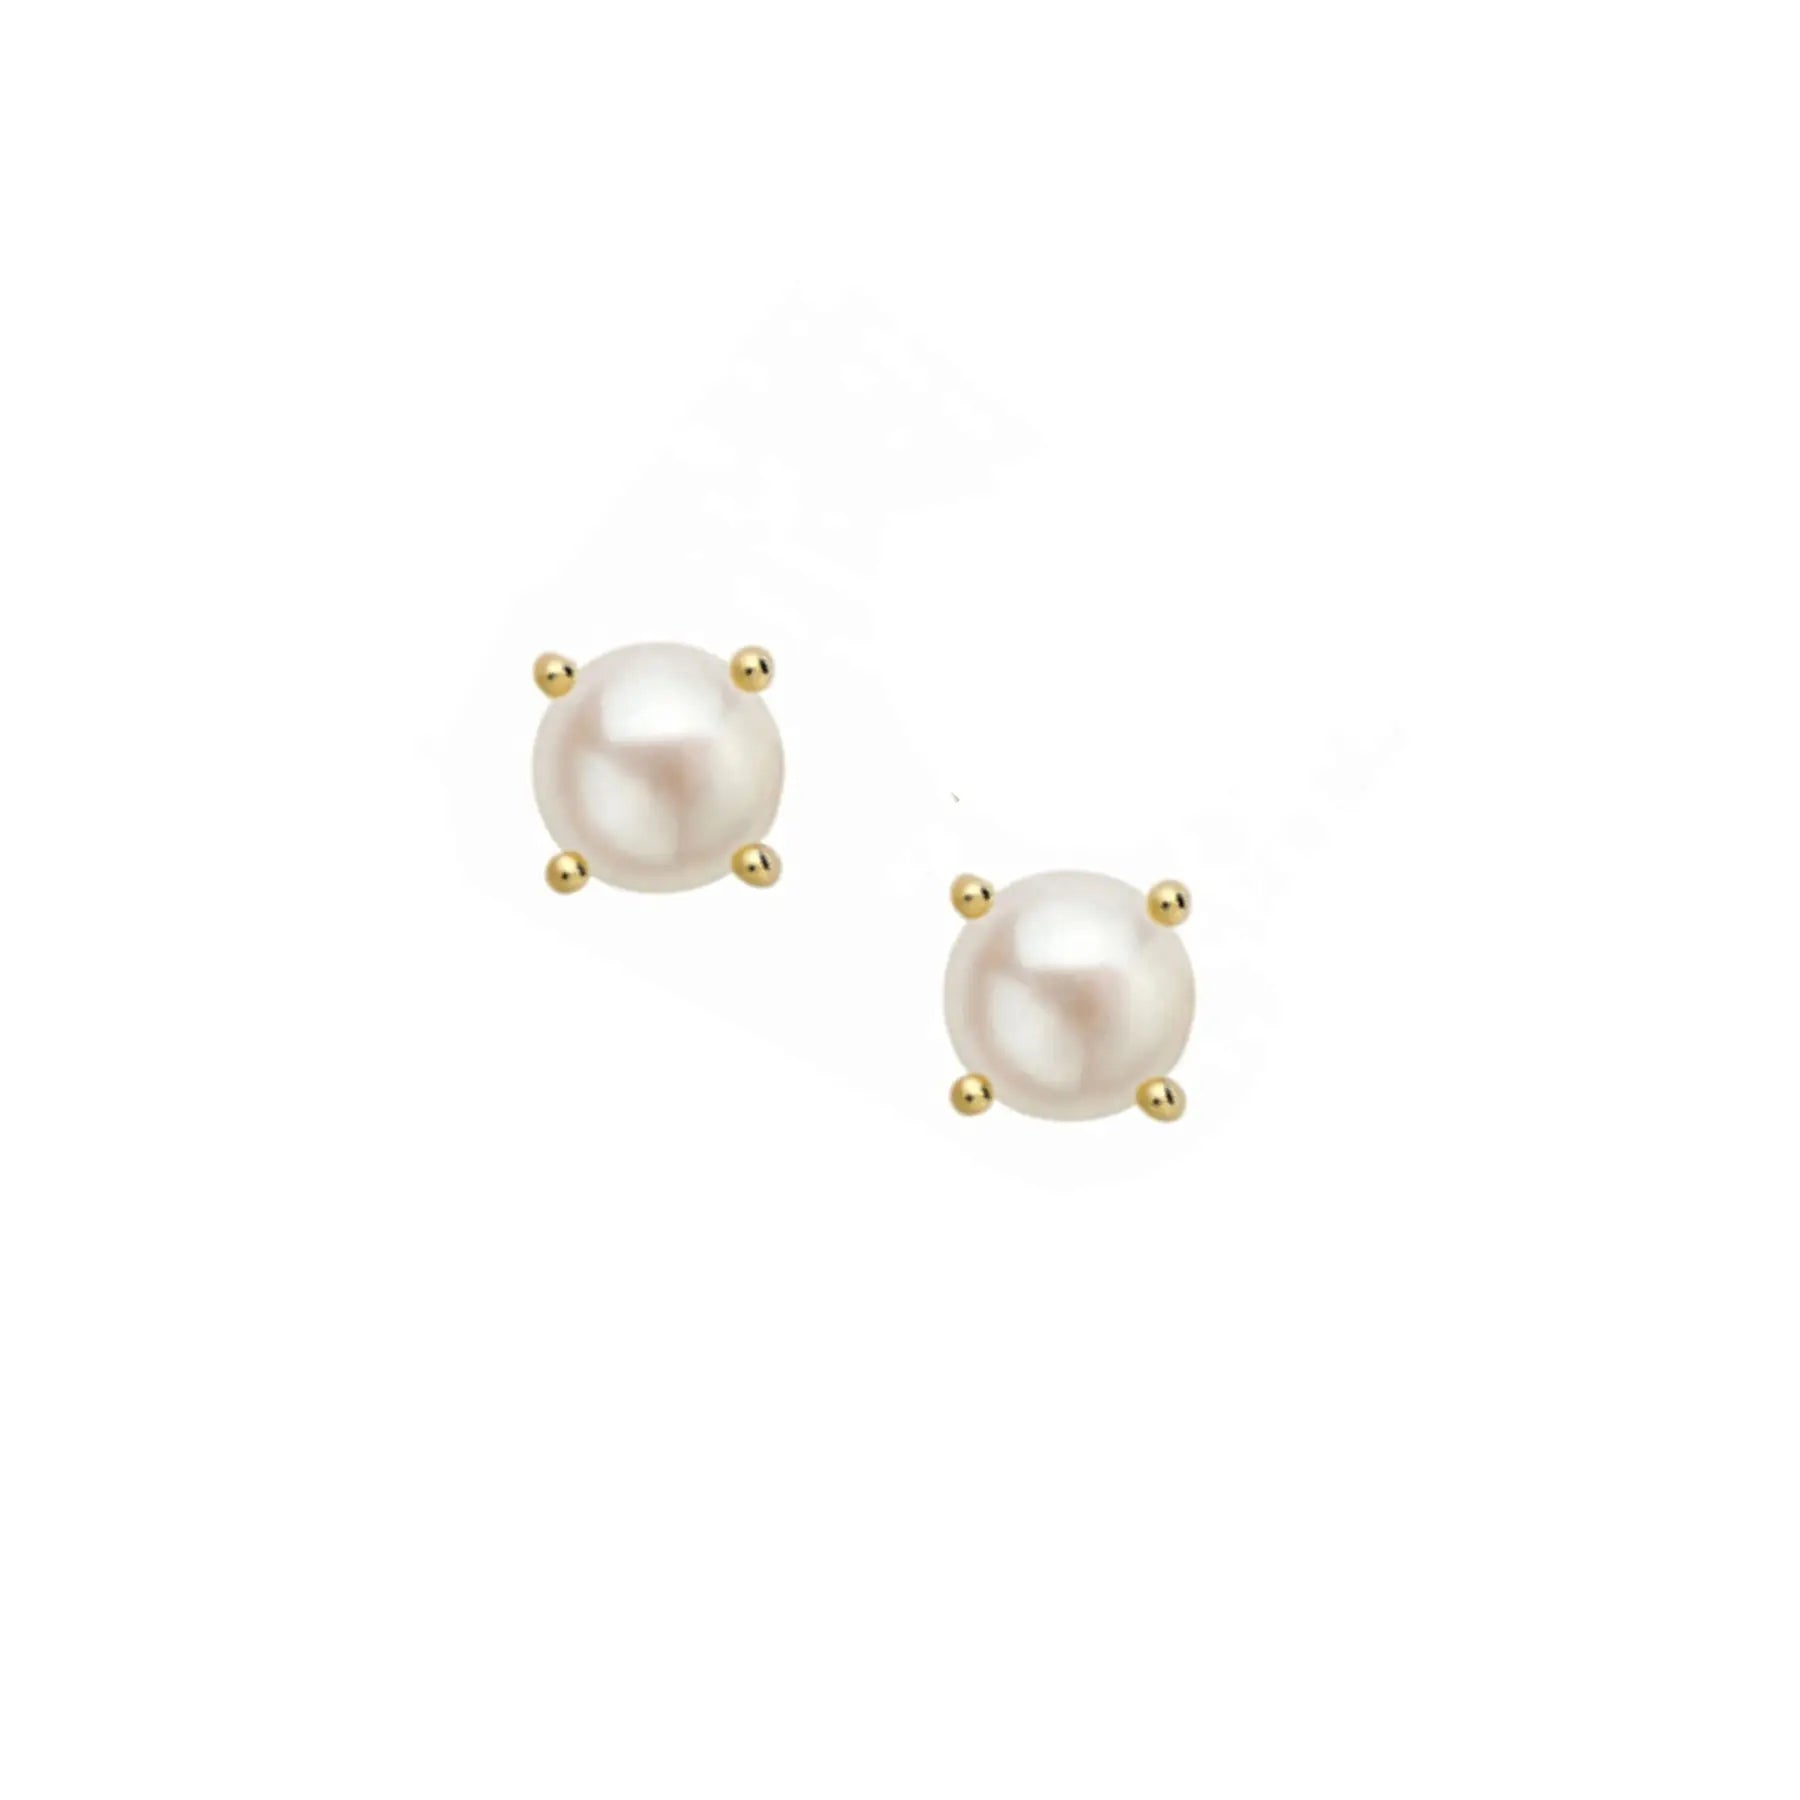 Natalie Wood - Shine Bright Mini Pearl Stud Earrings in Gold-110 Jewelry & Hair-Natalie Wood-July & June Women's Fashion Boutique Located in San Antonio, Texas